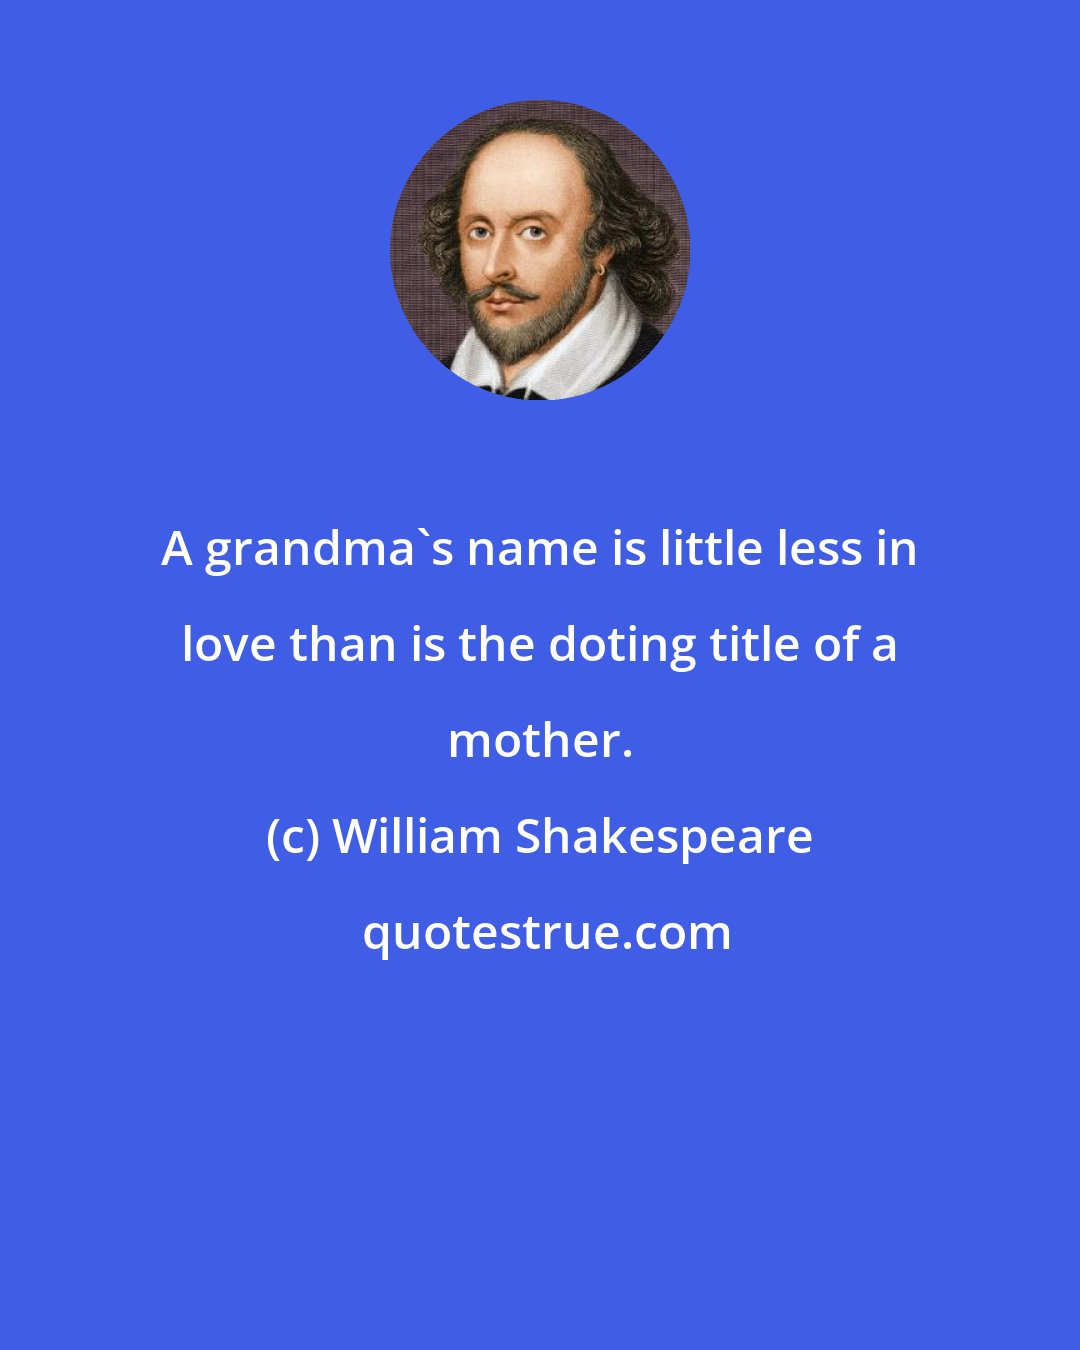 William Shakespeare: A grandma's name is little less in love than is the doting title of a mother.